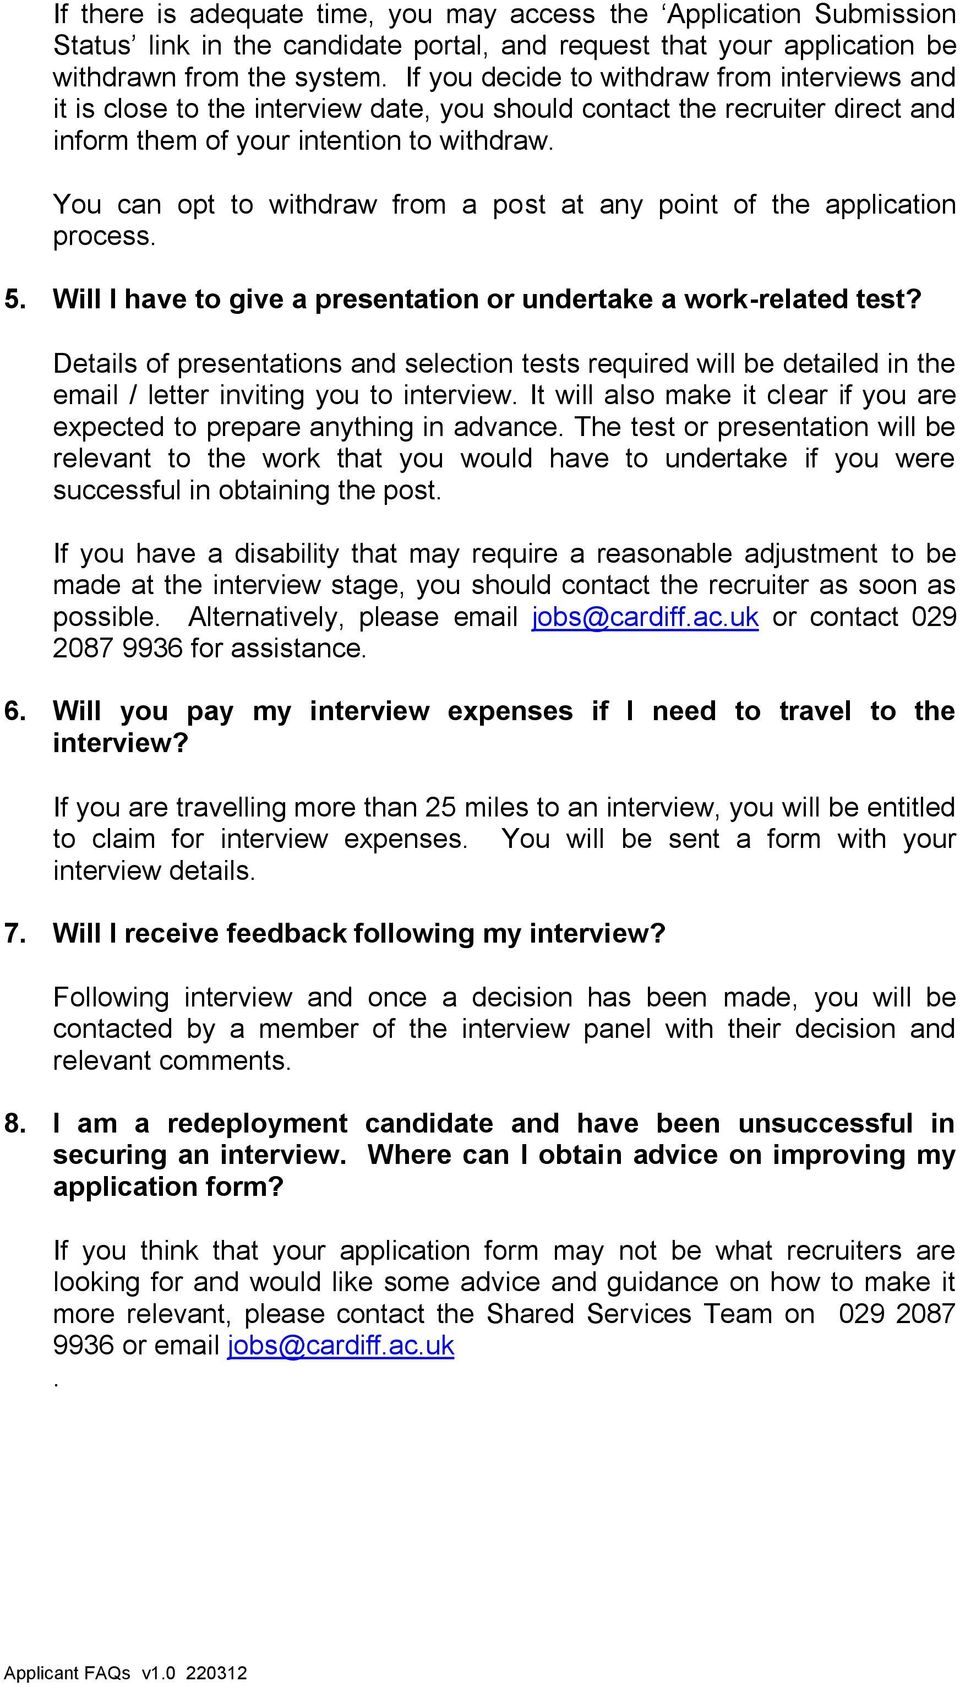 You can opt to withdraw from a post at any point of the application process. 5. Will I have to give a presentation or undertake a work-related test?